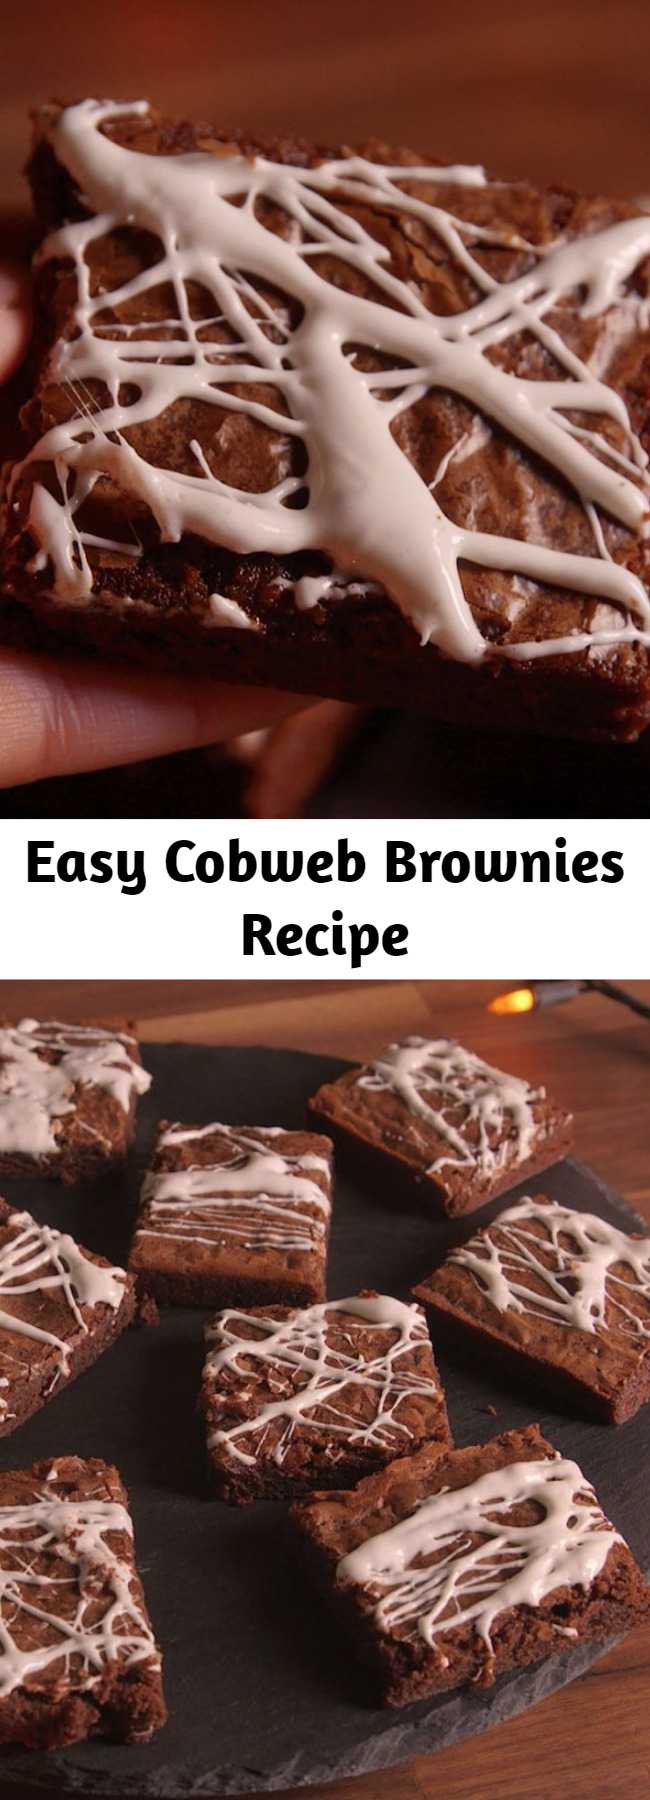 Easy Cobweb Brownies Recipe - Here's the super easy way to dress up a box of brownies.